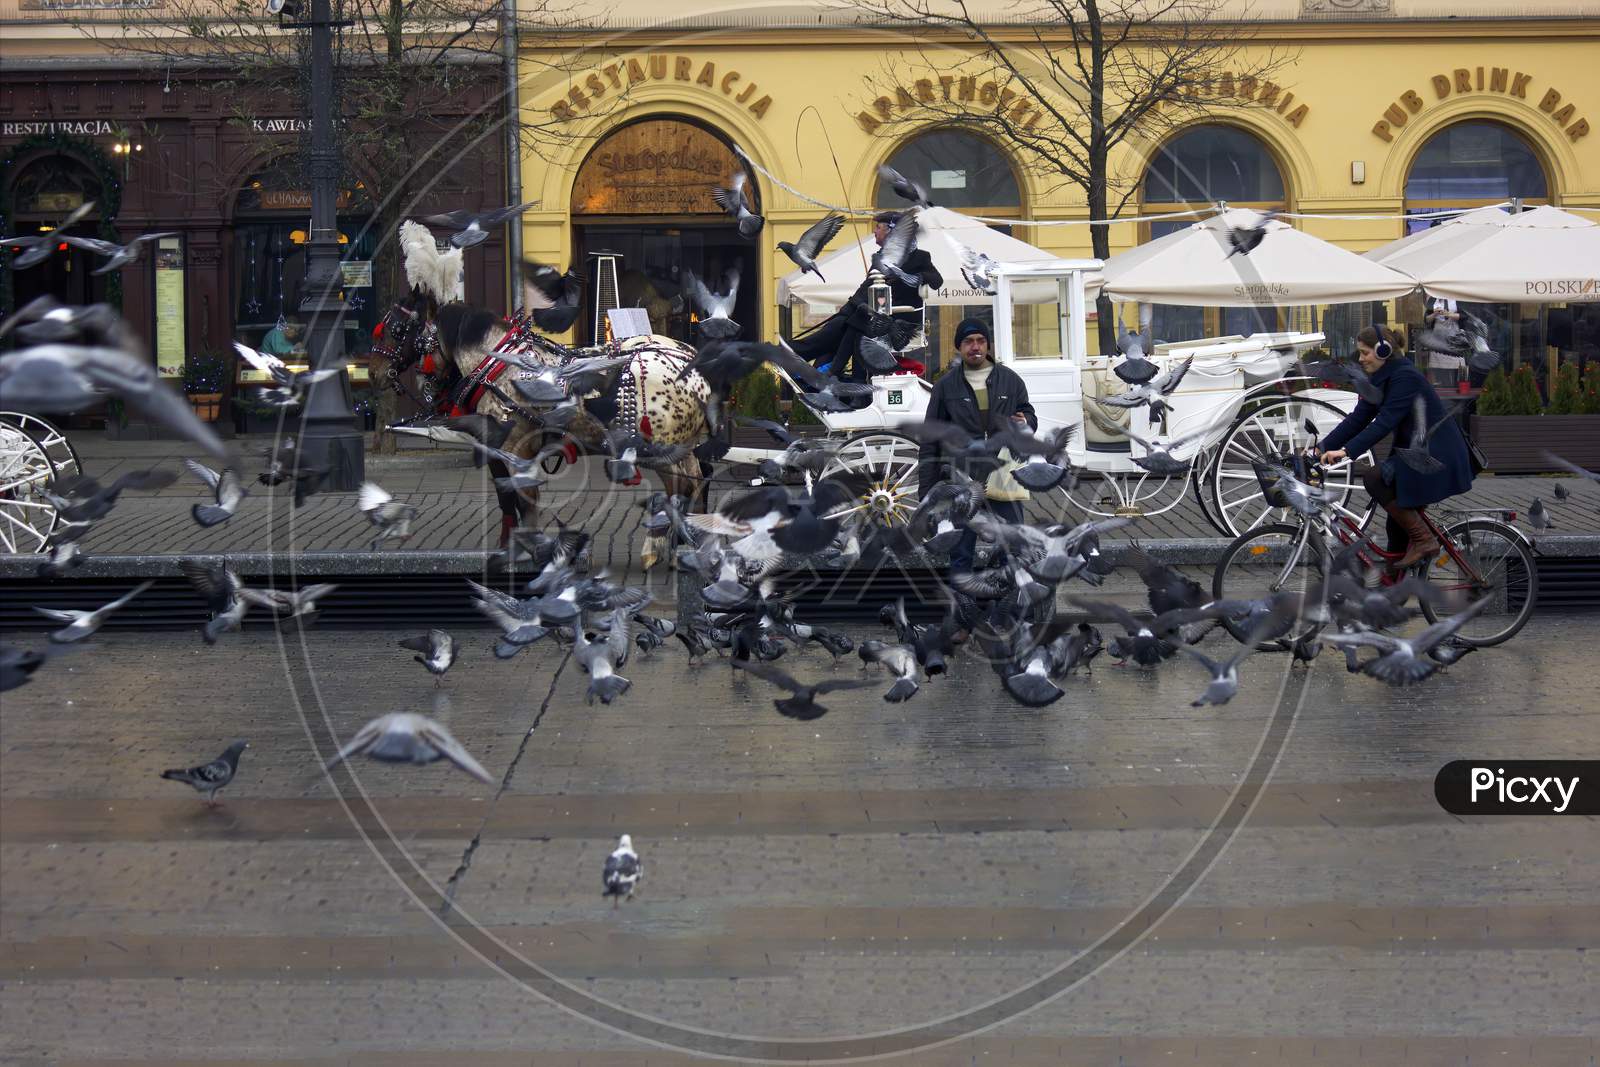 Krakow, Poland - December 16, 2014: A Man Feeding Pigeons Bird And A Female Rides A Bicycle At A City Center Main Square During Christmas Eve